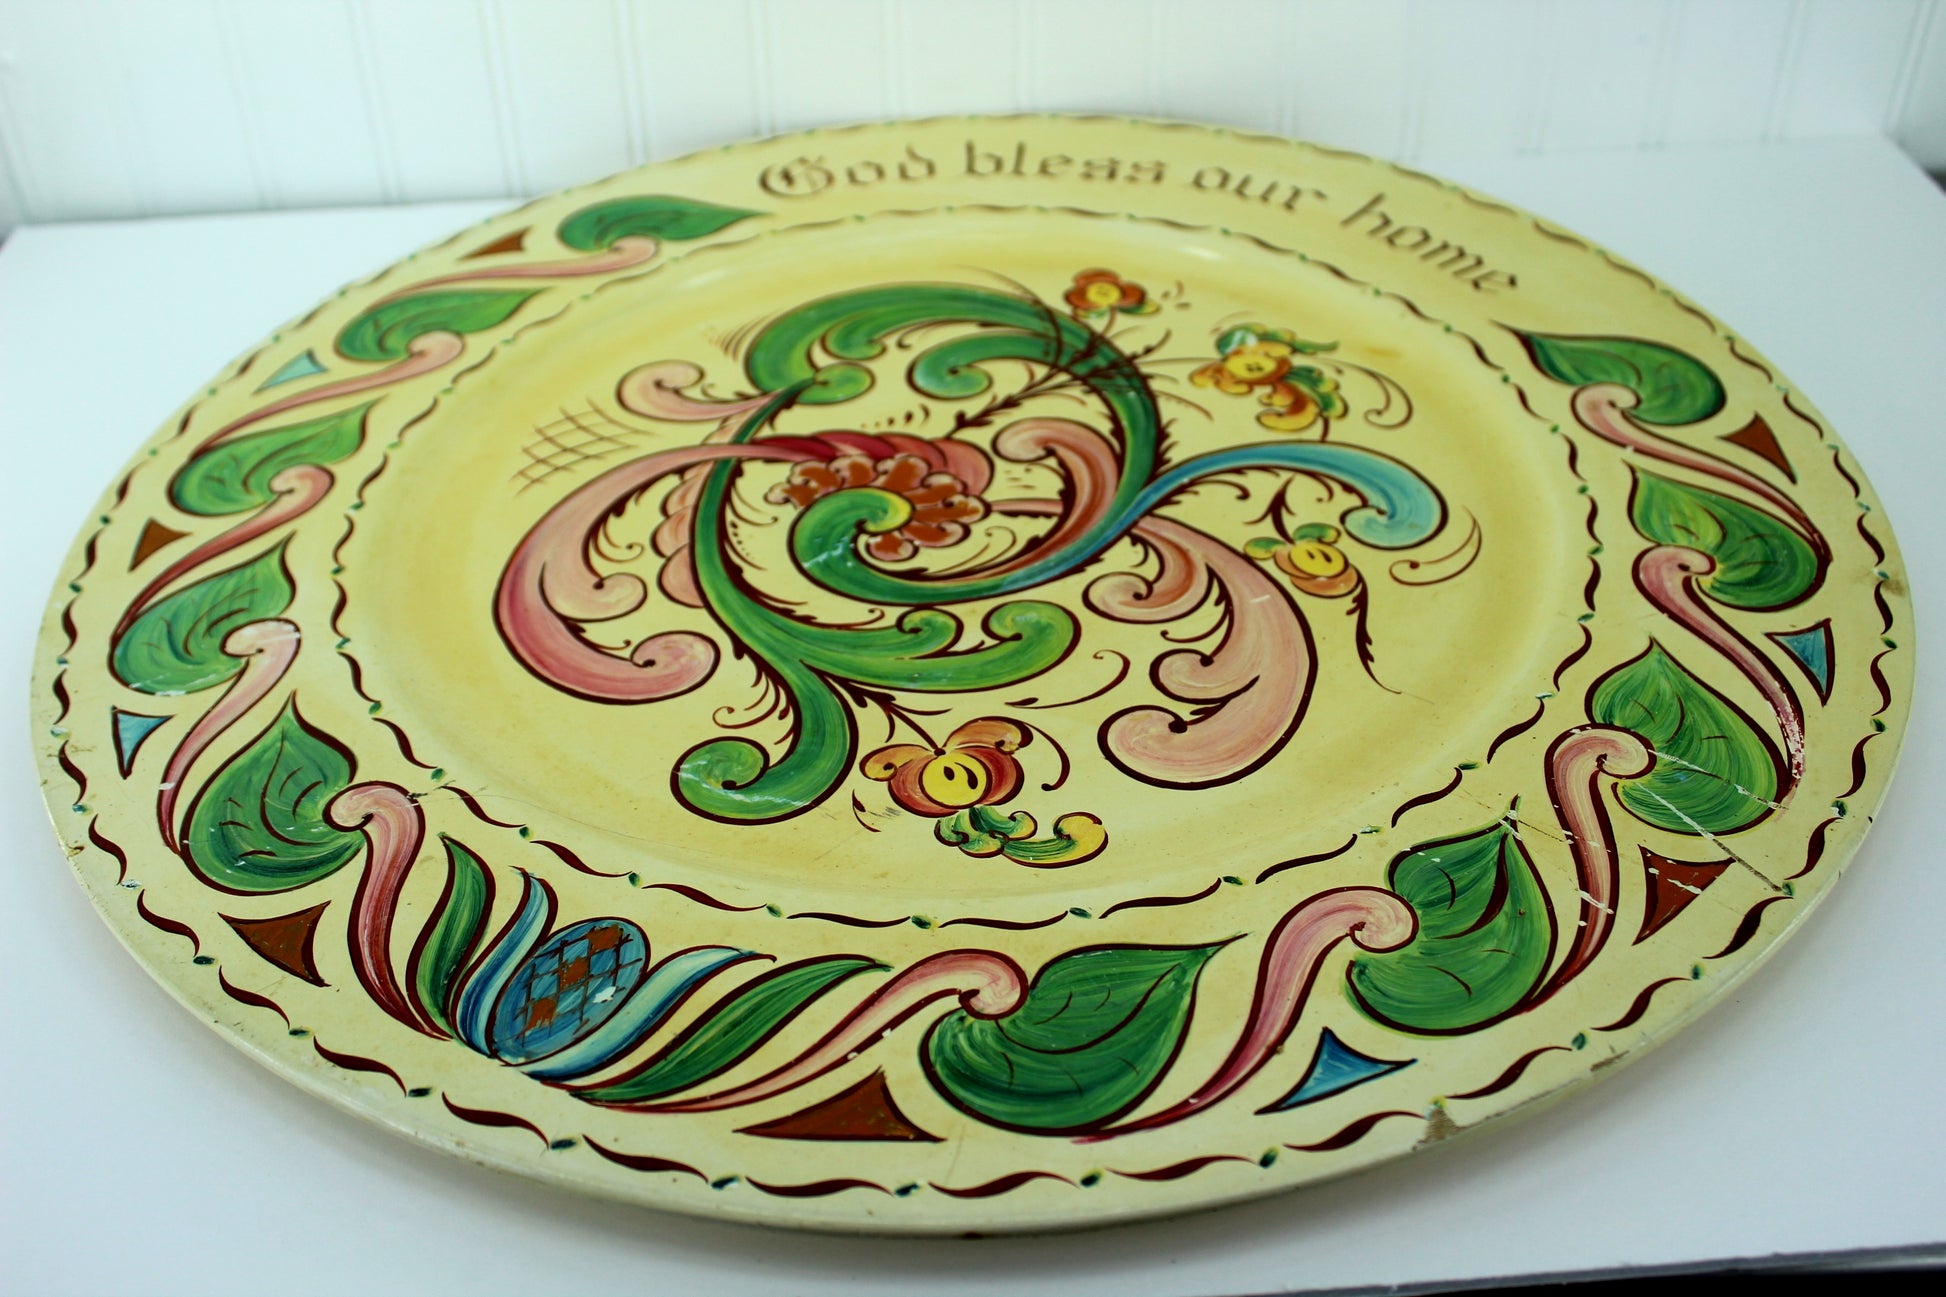 Rosemaled Wood Plate 20" Eleanor Erickson St Paul MN signed Solhaug Student Per Lysne substantial weight